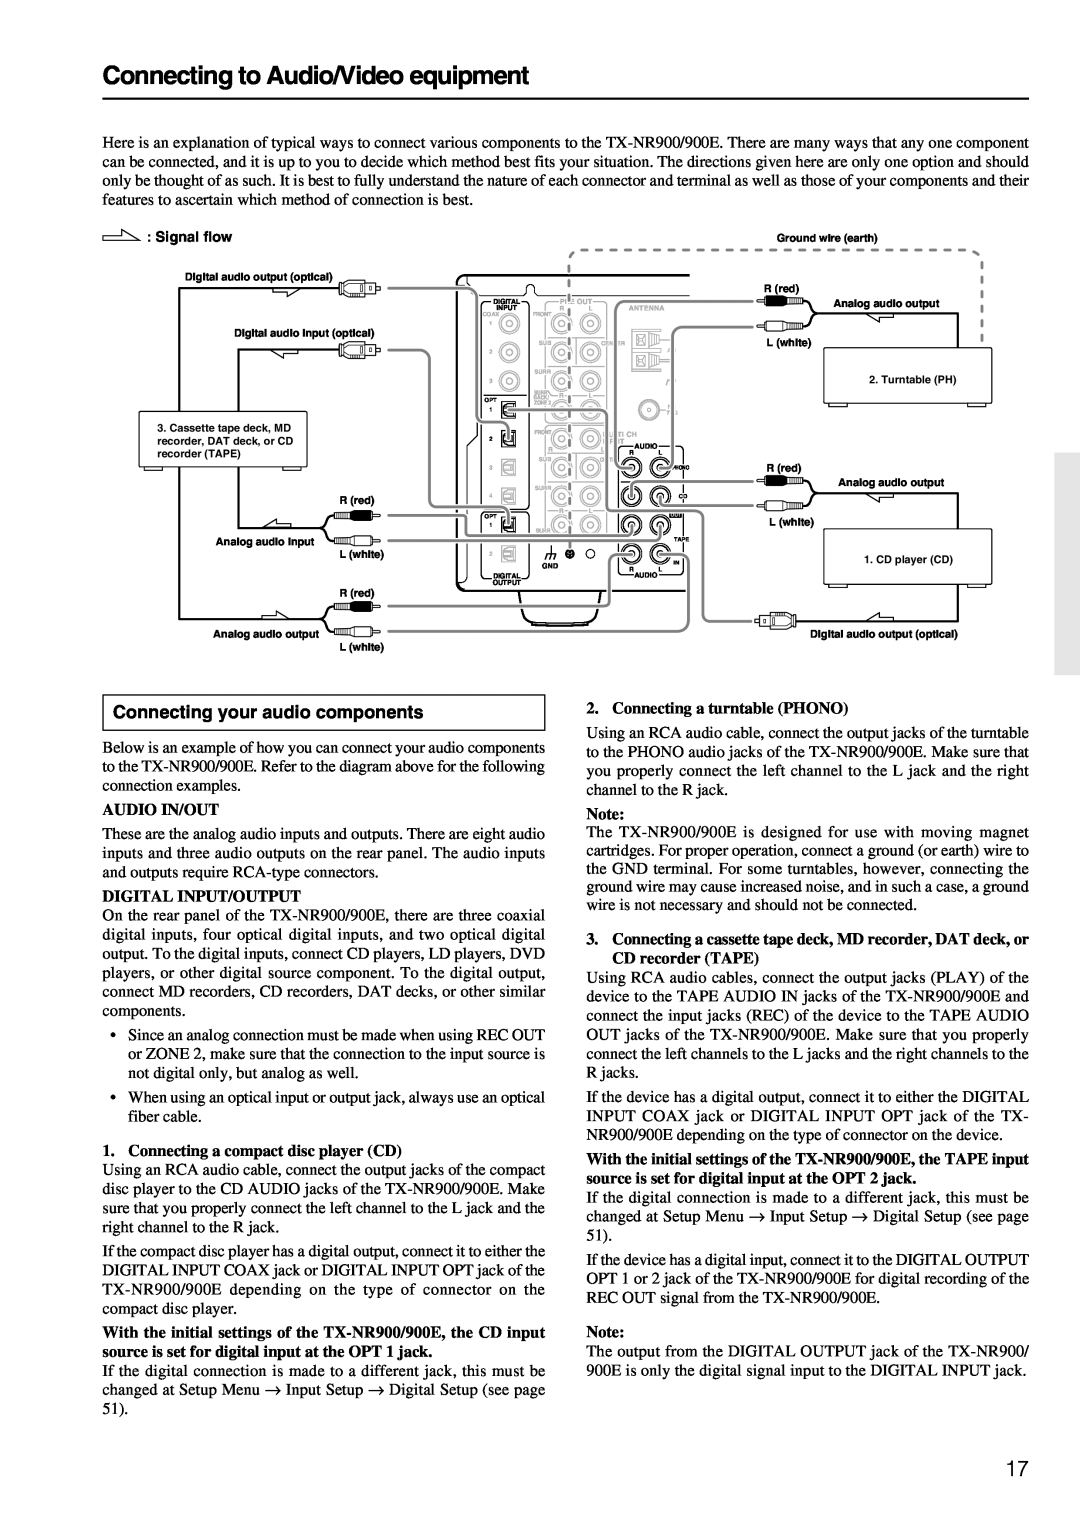 Onkyo TX-NR900E instruction manual Connecting to Audio/Video equipment, Connecting your audio components 